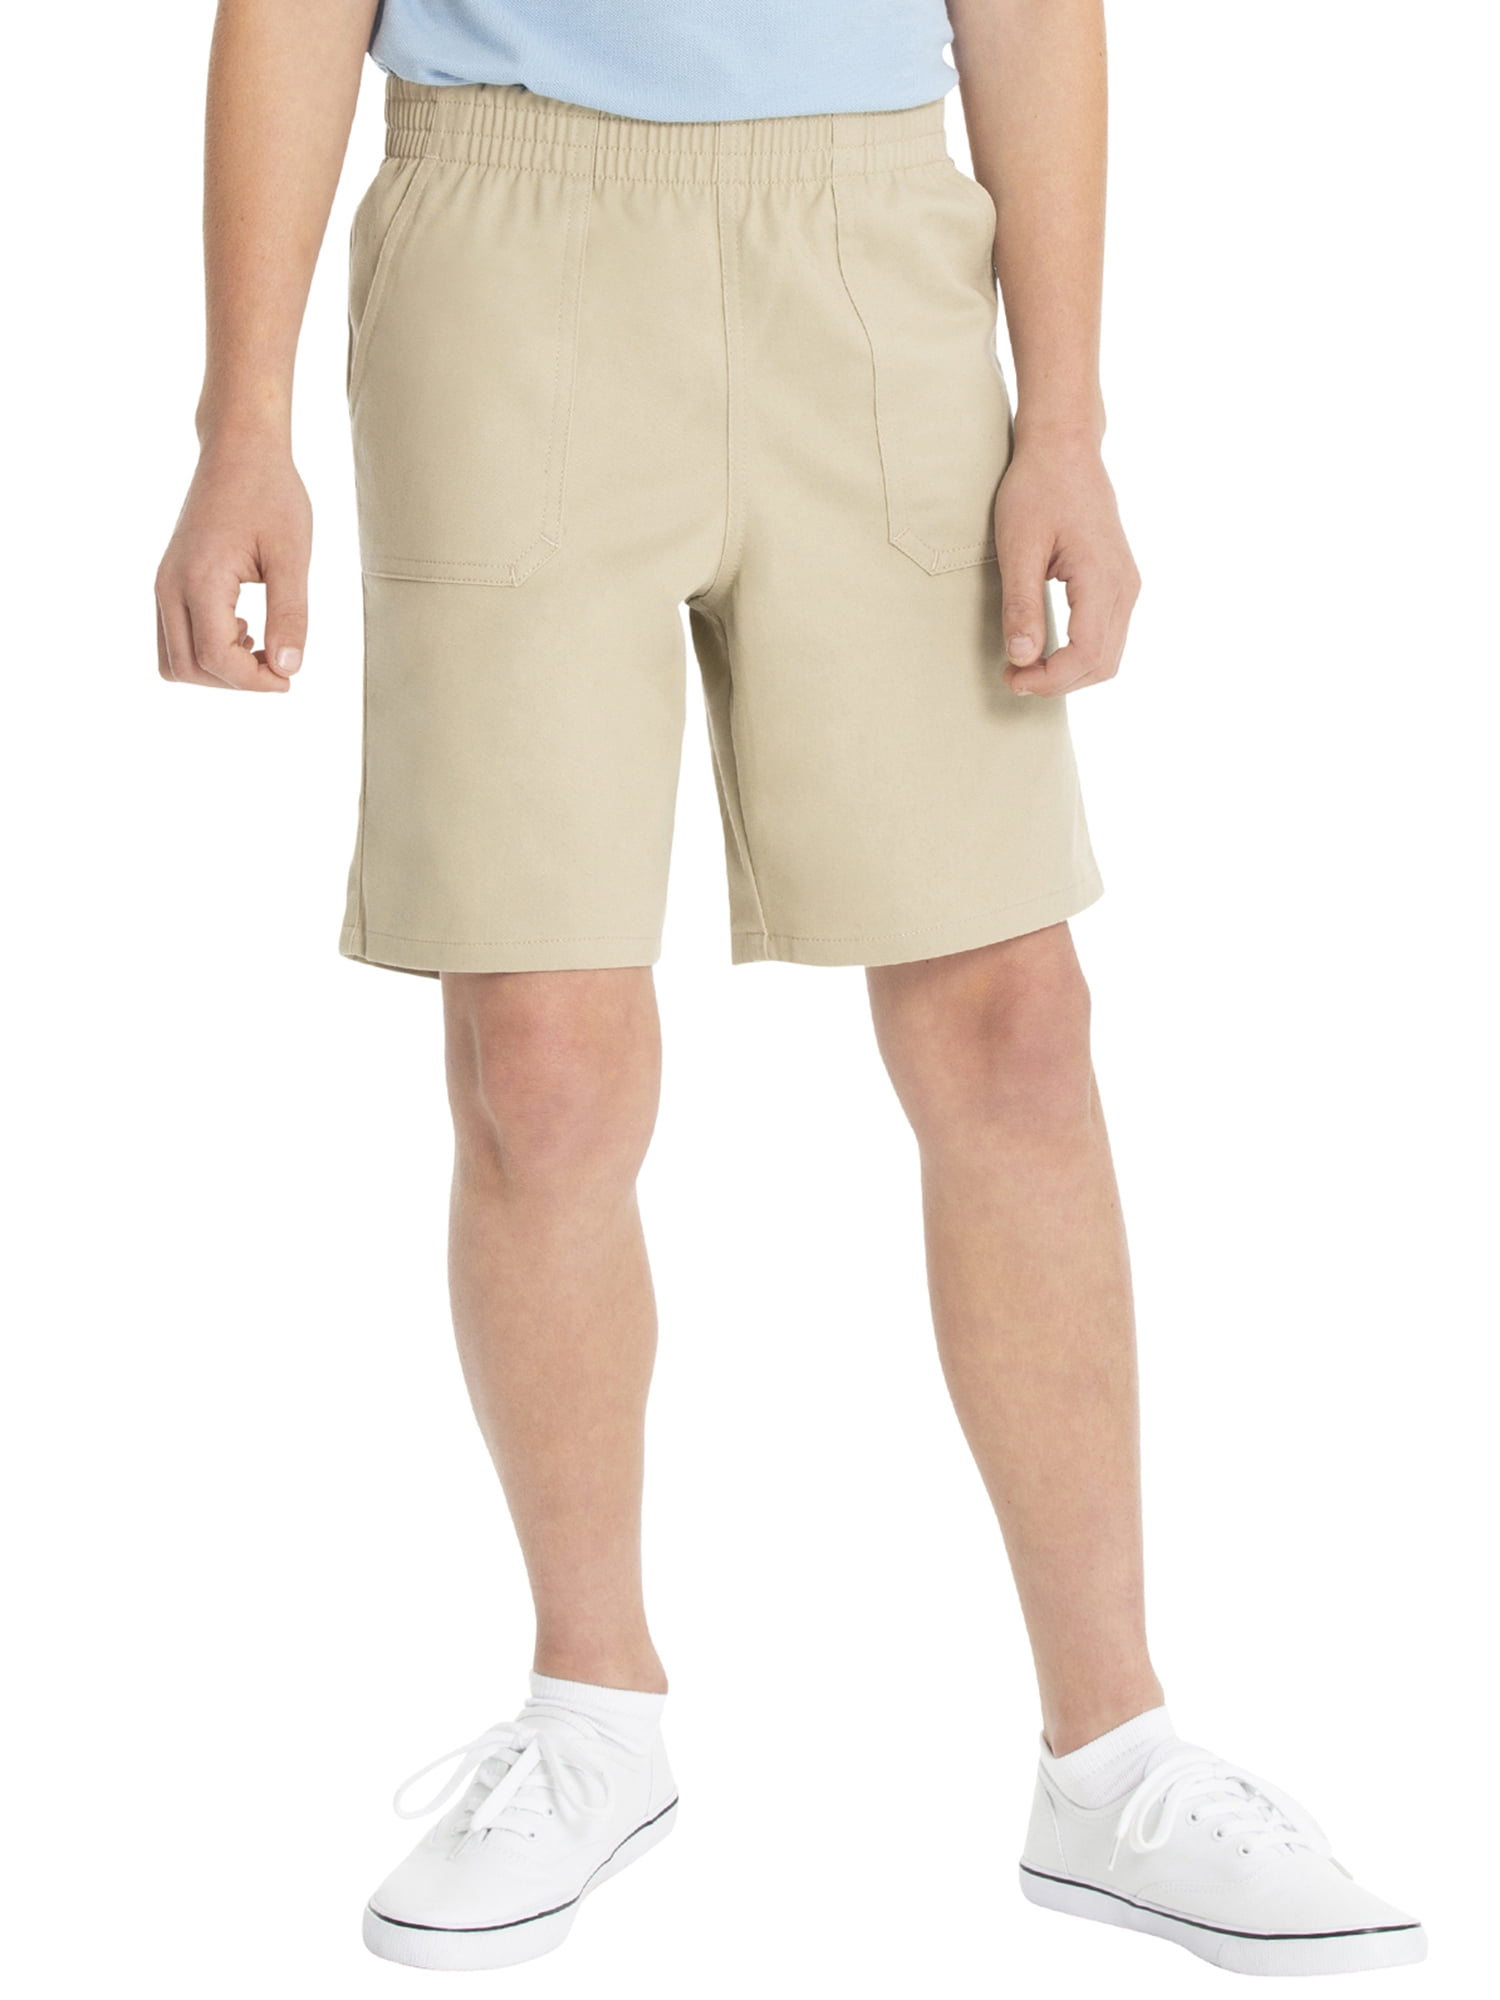 NEW CHAPS Boys Approved Schoolwear Navy Pleated Khaki Shorts 16H 18R 18H 